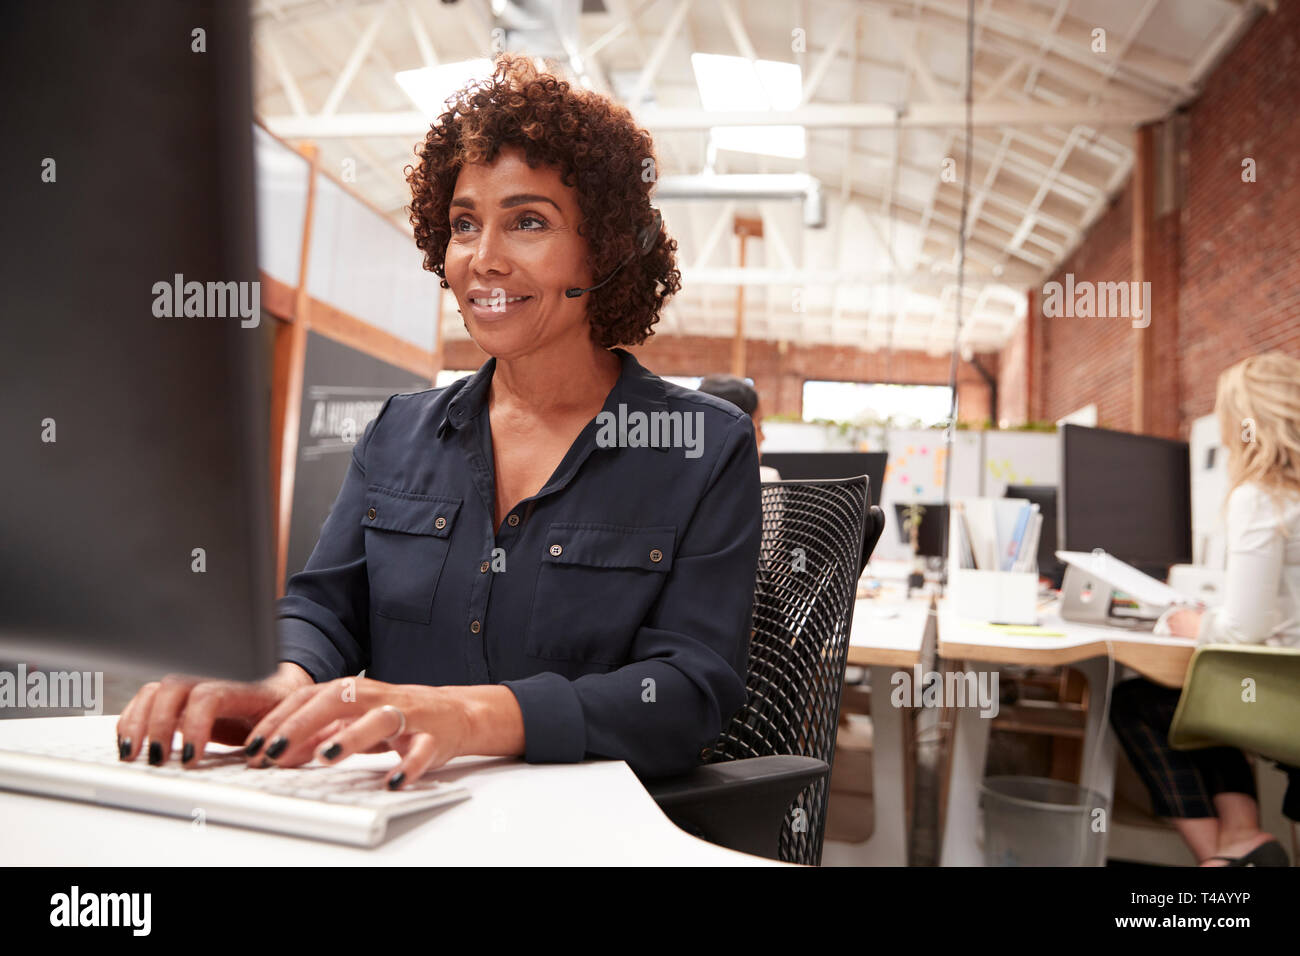 Female Customer Services Agent Working At Desk In Call Center Stock Photo